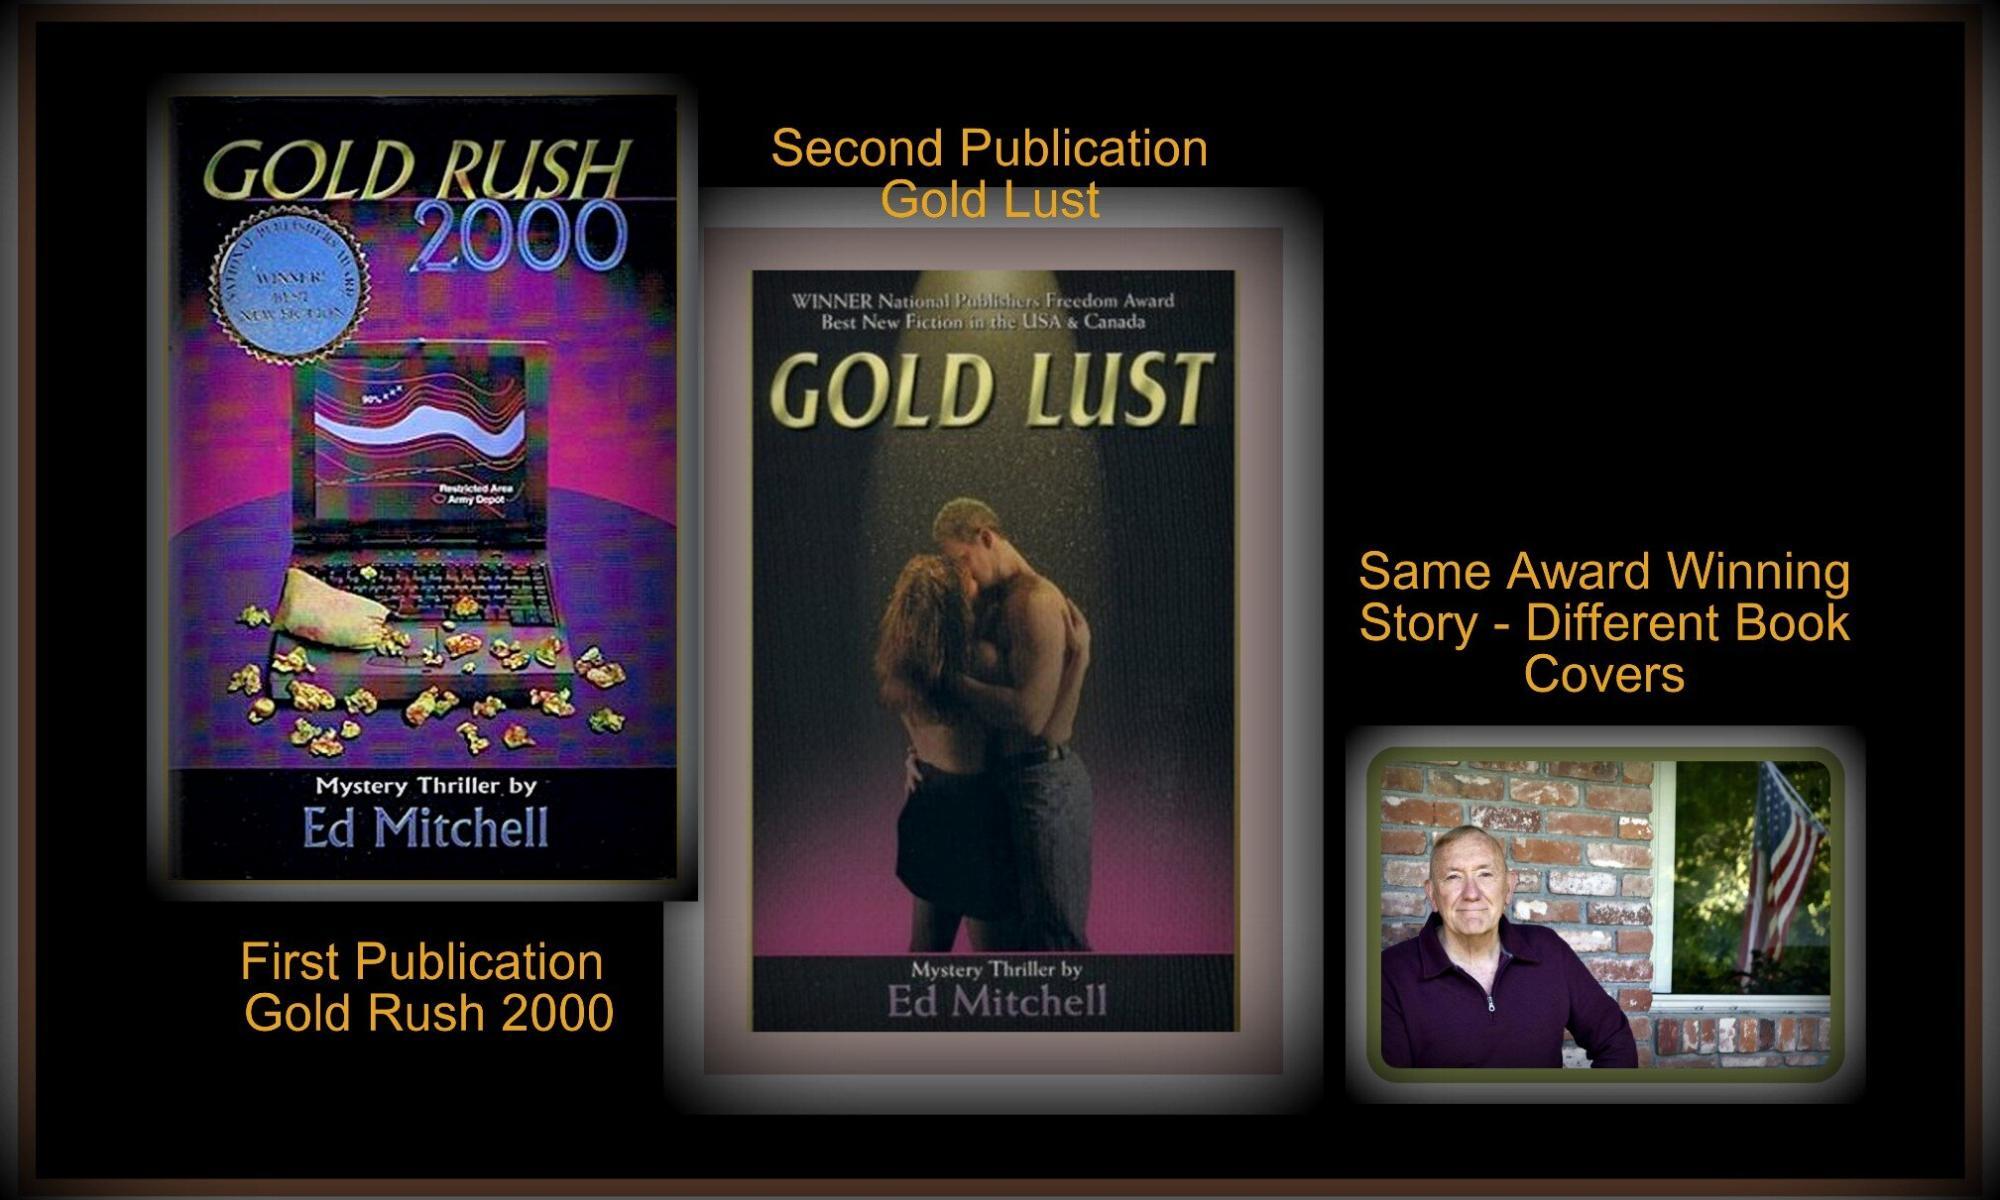 The Gold Lust and Gold Rush 2000 is the same book with different covers